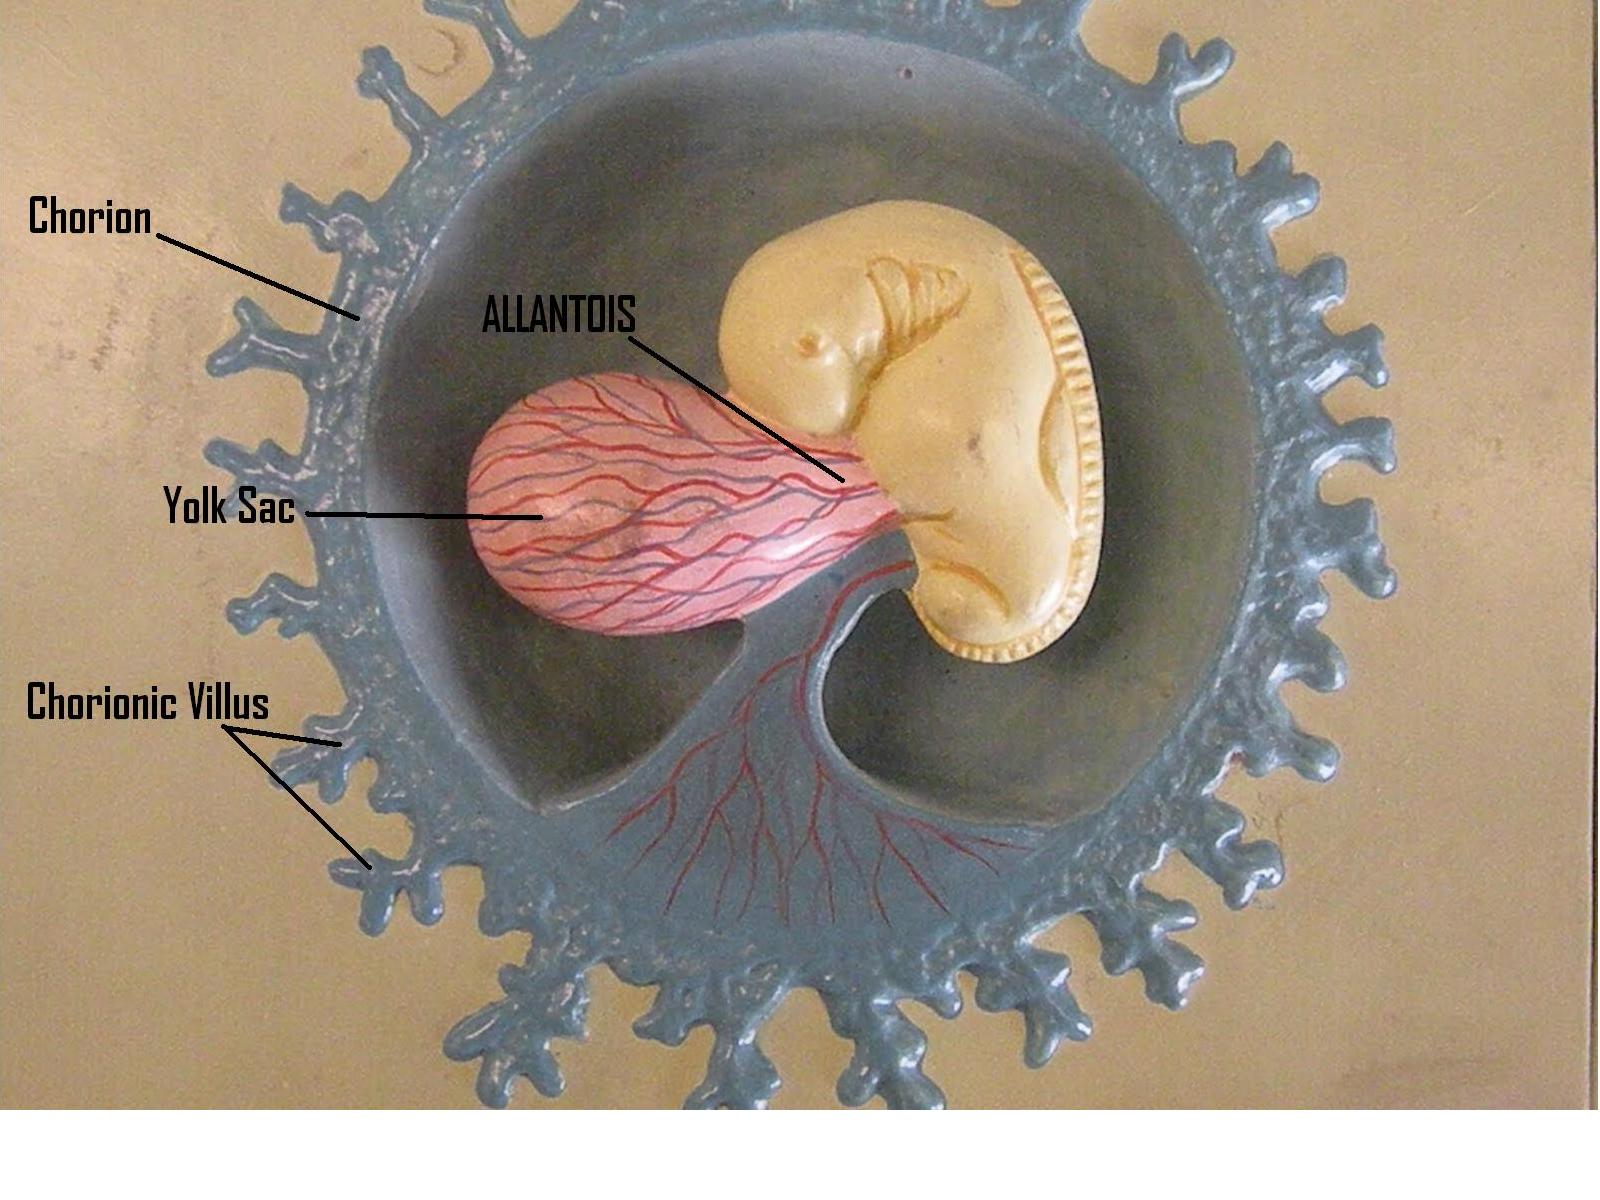 Psc Anatomy And Physiology Labeled Embryonic Development Models My